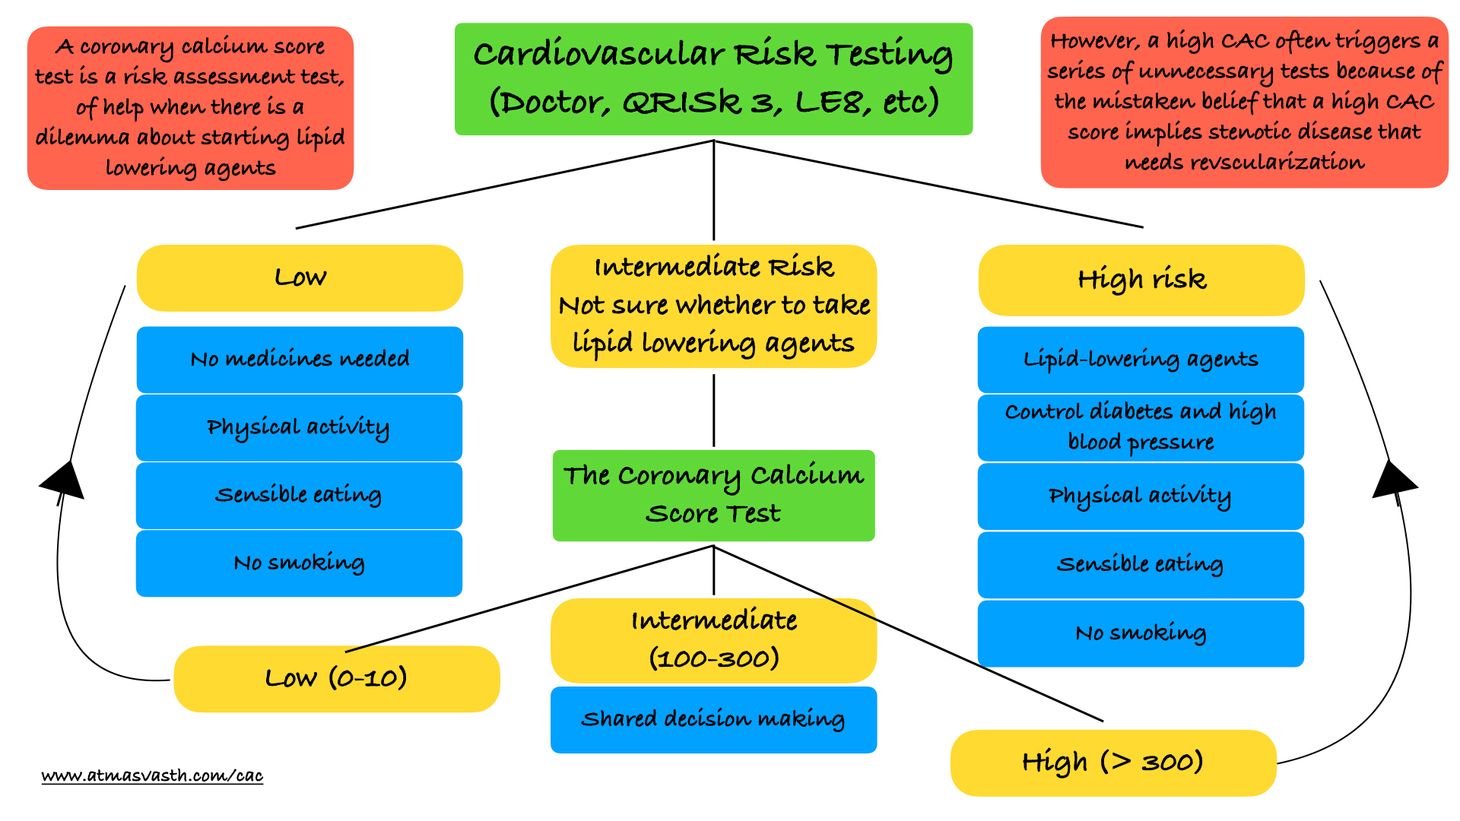 The Coronary Calcium Score Test - A Useful Test, But...